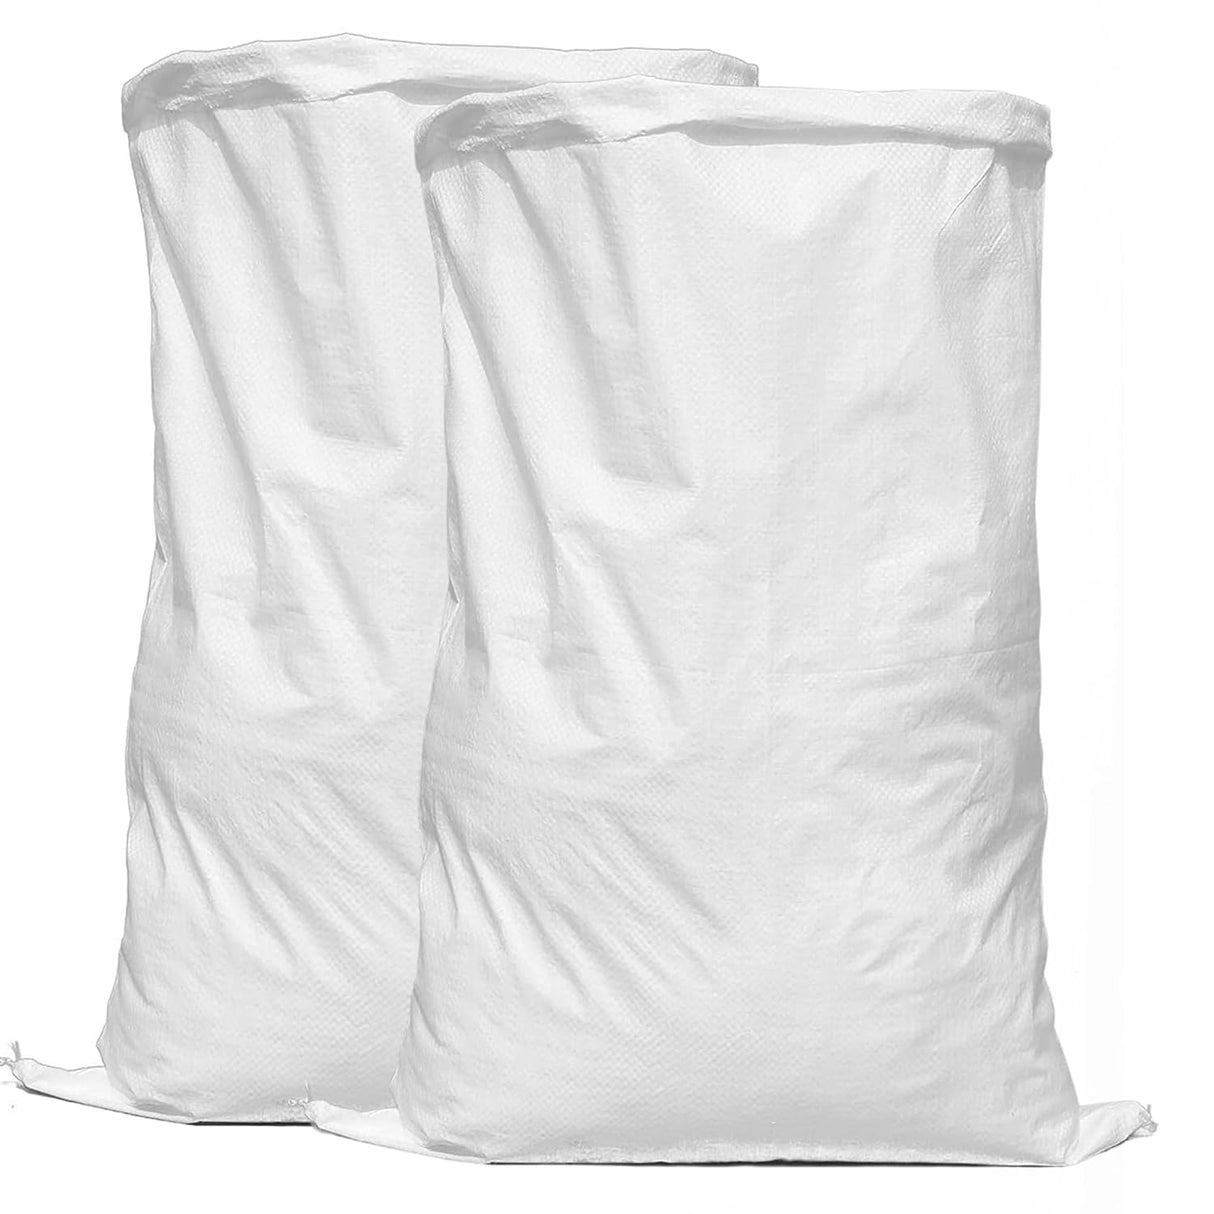 Singhal Empty Bag, Bora, Bori for Packing of Food, Vegatable, Grains, Wheat, Rice, Sugar etc Products (27x45 inches) - Pack of 8